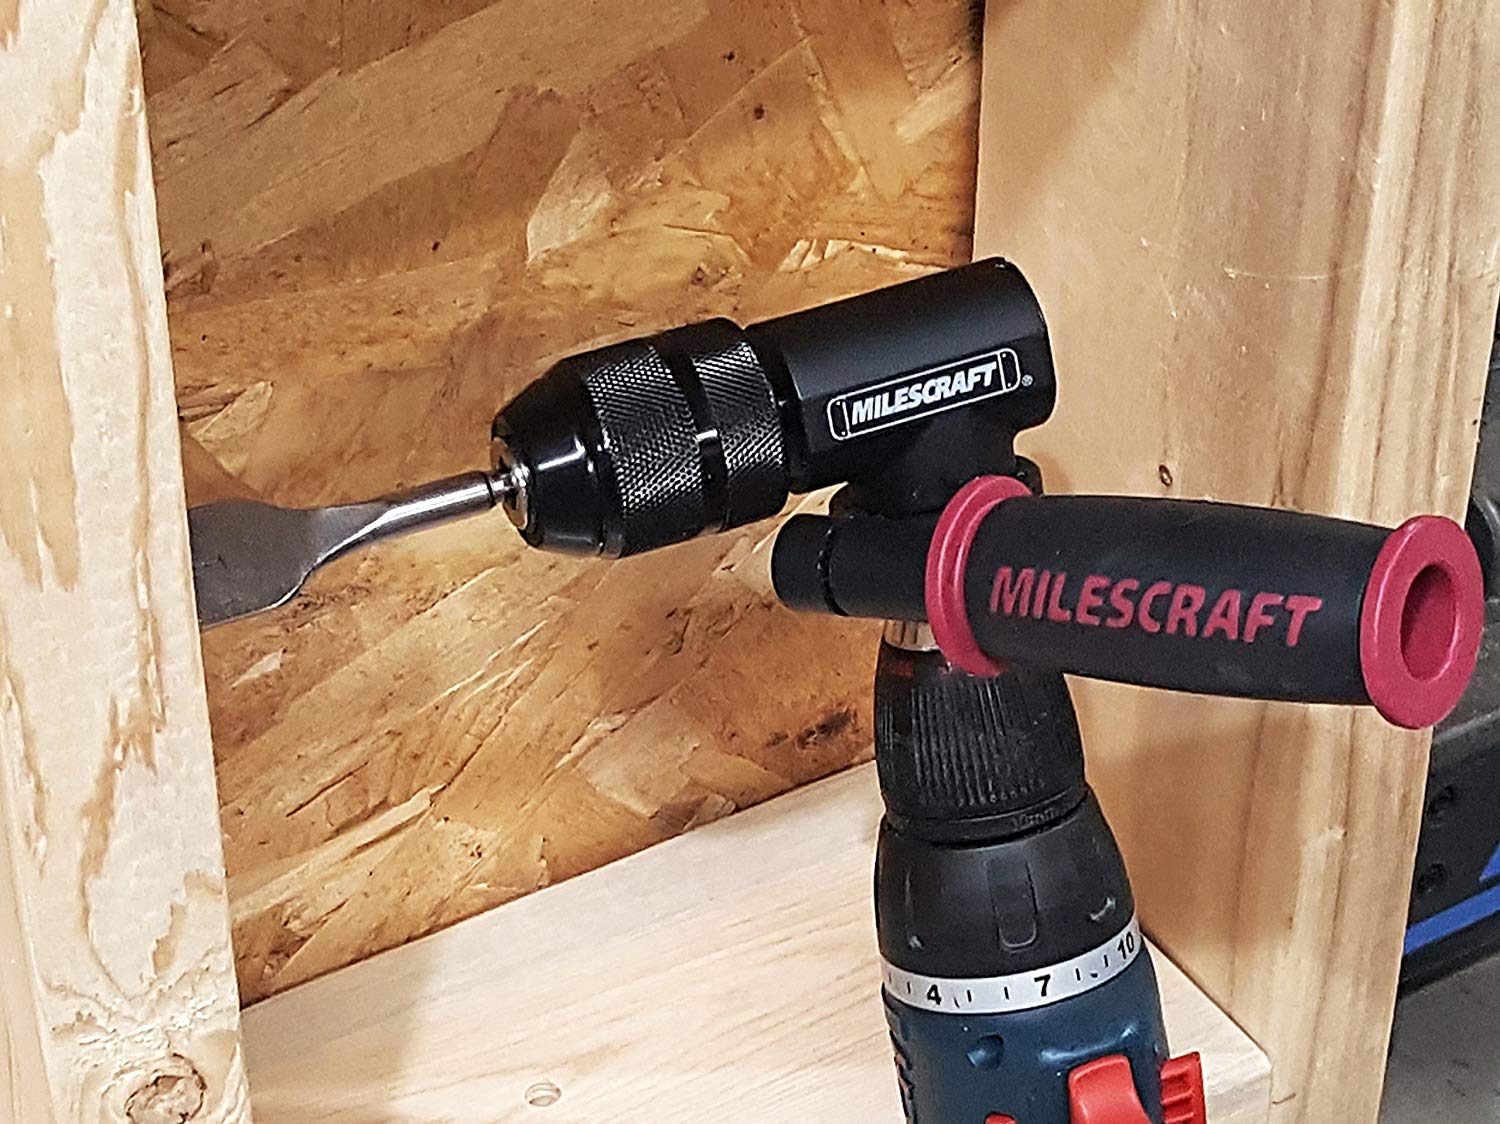 The Best Right Angle Drill Attachments